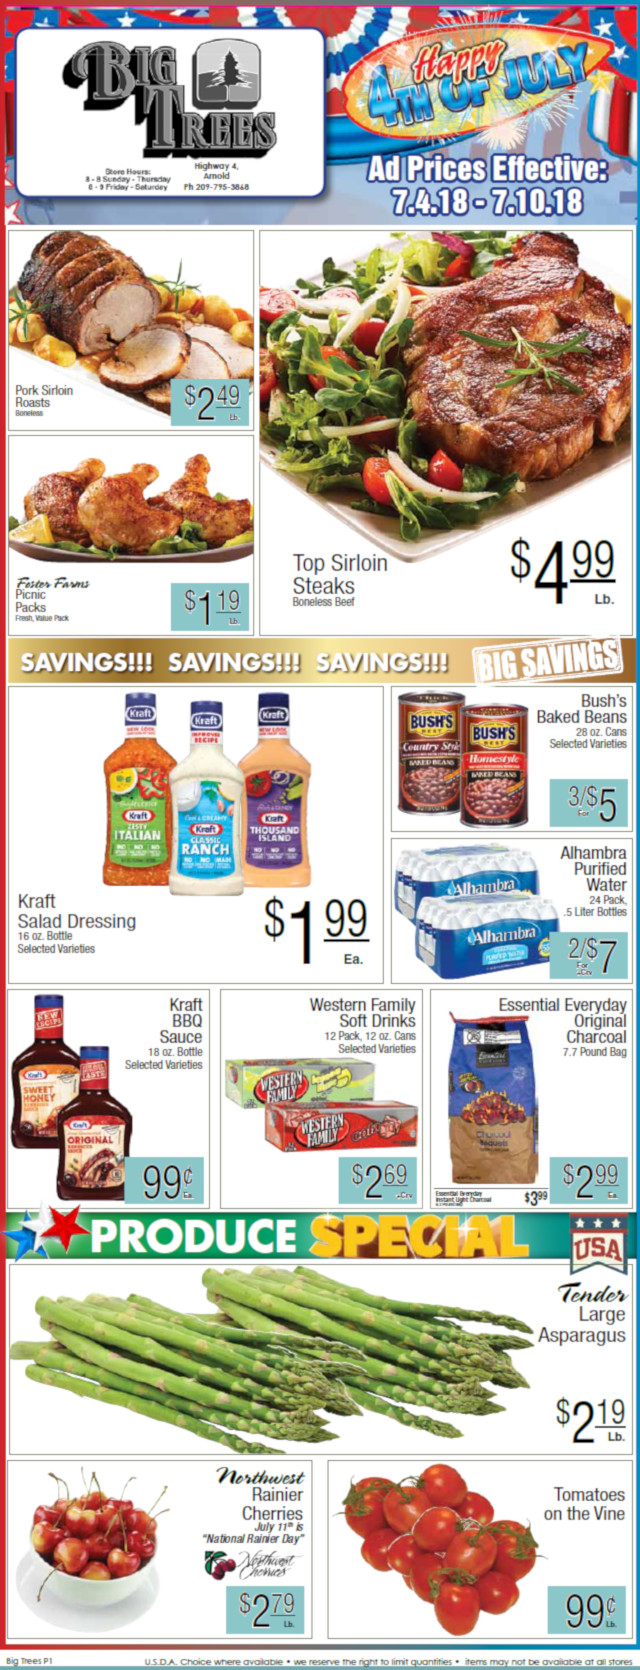 Big Trees Market Weekly Ad & Grocery Specials Through July 10th